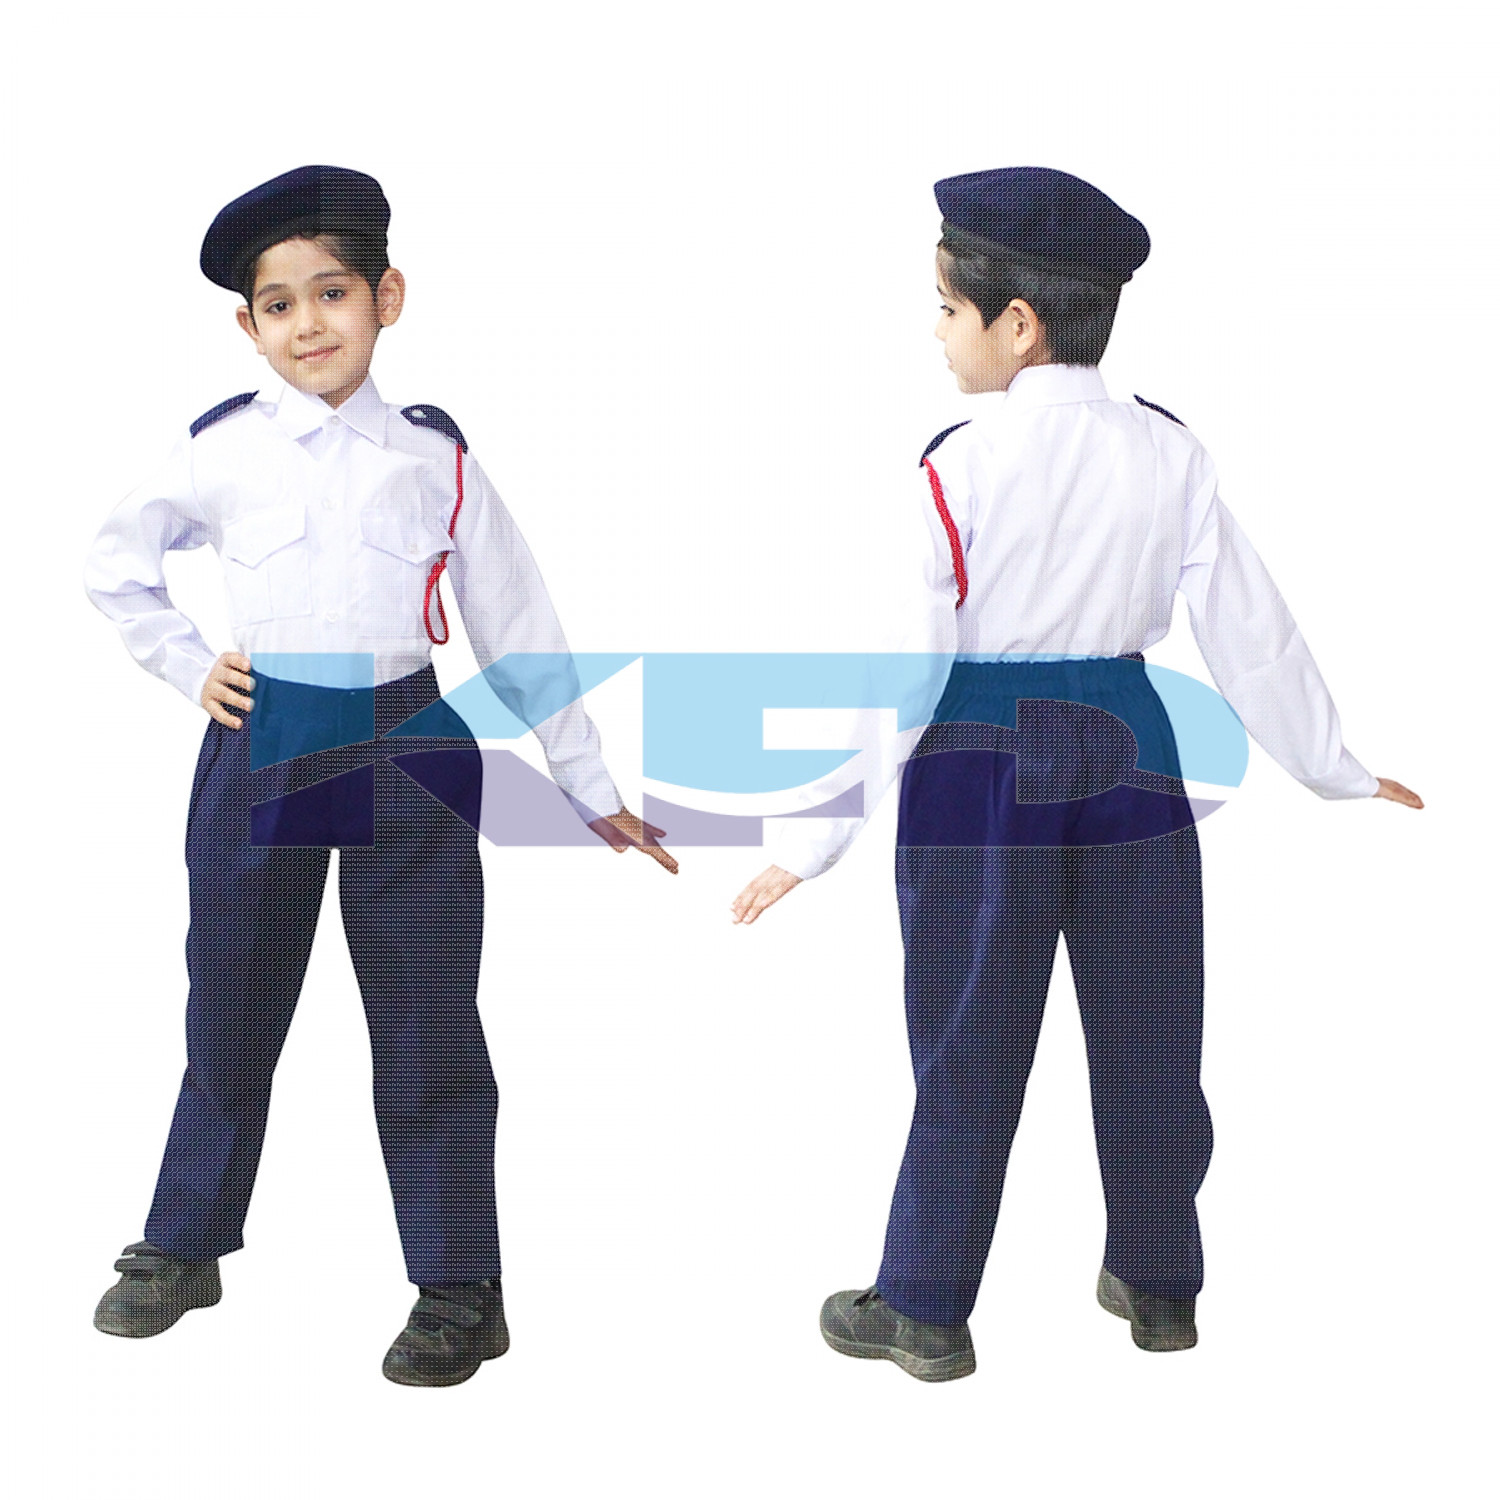 Traffic Police Our Helper Costume For Kids School Annual Function/Theme Party/Competition/Stage Shows Dress